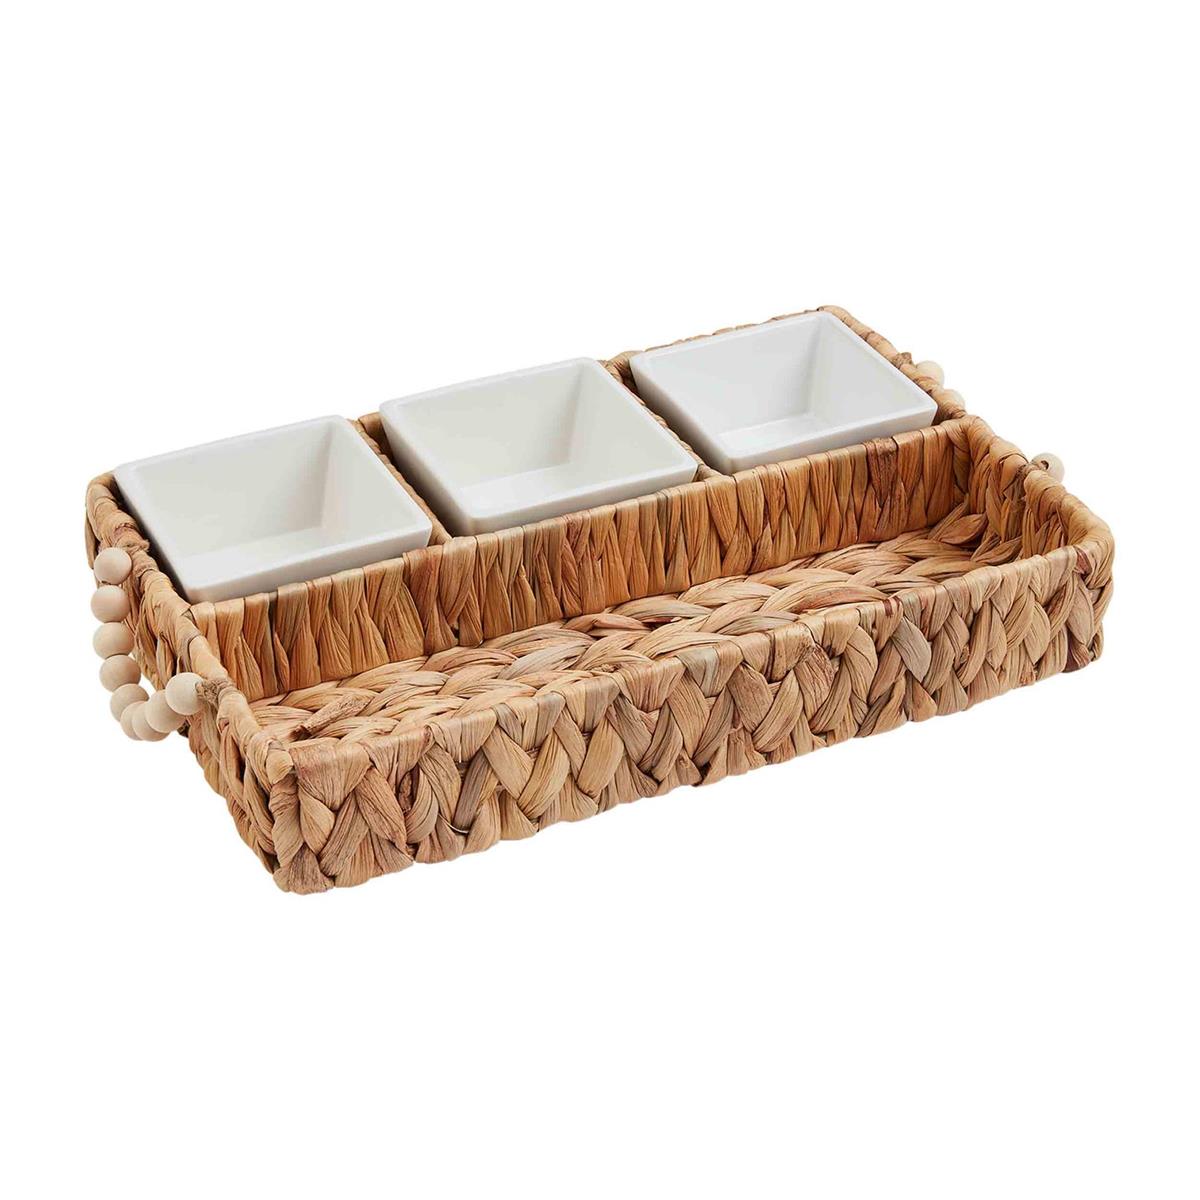 woven tray and dip cup set on a white background